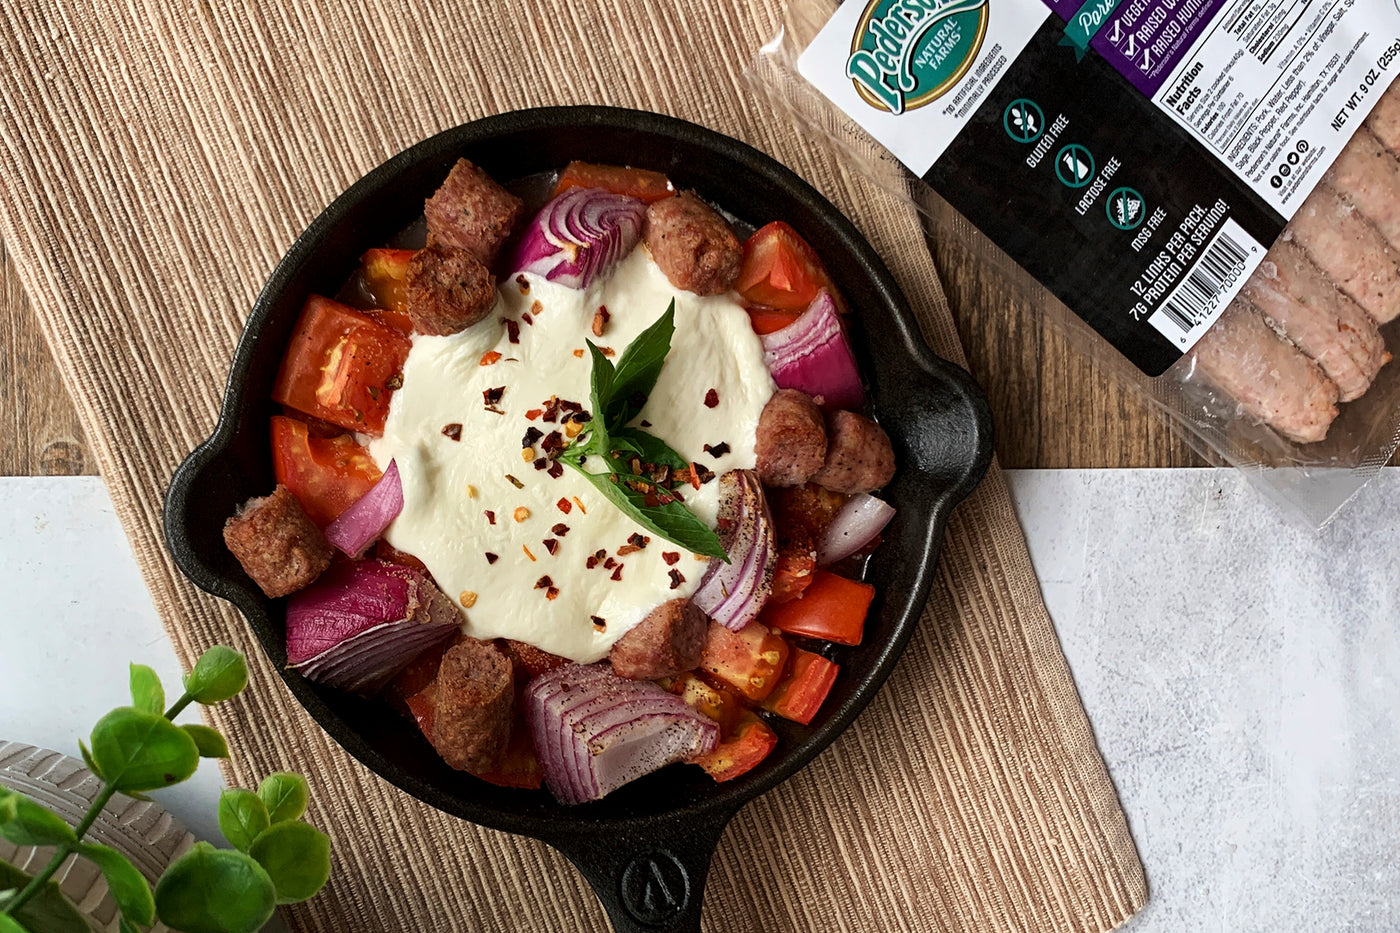 Image of a Burrata Breakfast Skillet - Pederson's Fully Cooked Mild Breakfast Sausage Links with largely chopped tomato & onion, topped with one burrata sprinkled with basil & red pepper flakes. The dish is in a cast iron skillet with wood background.